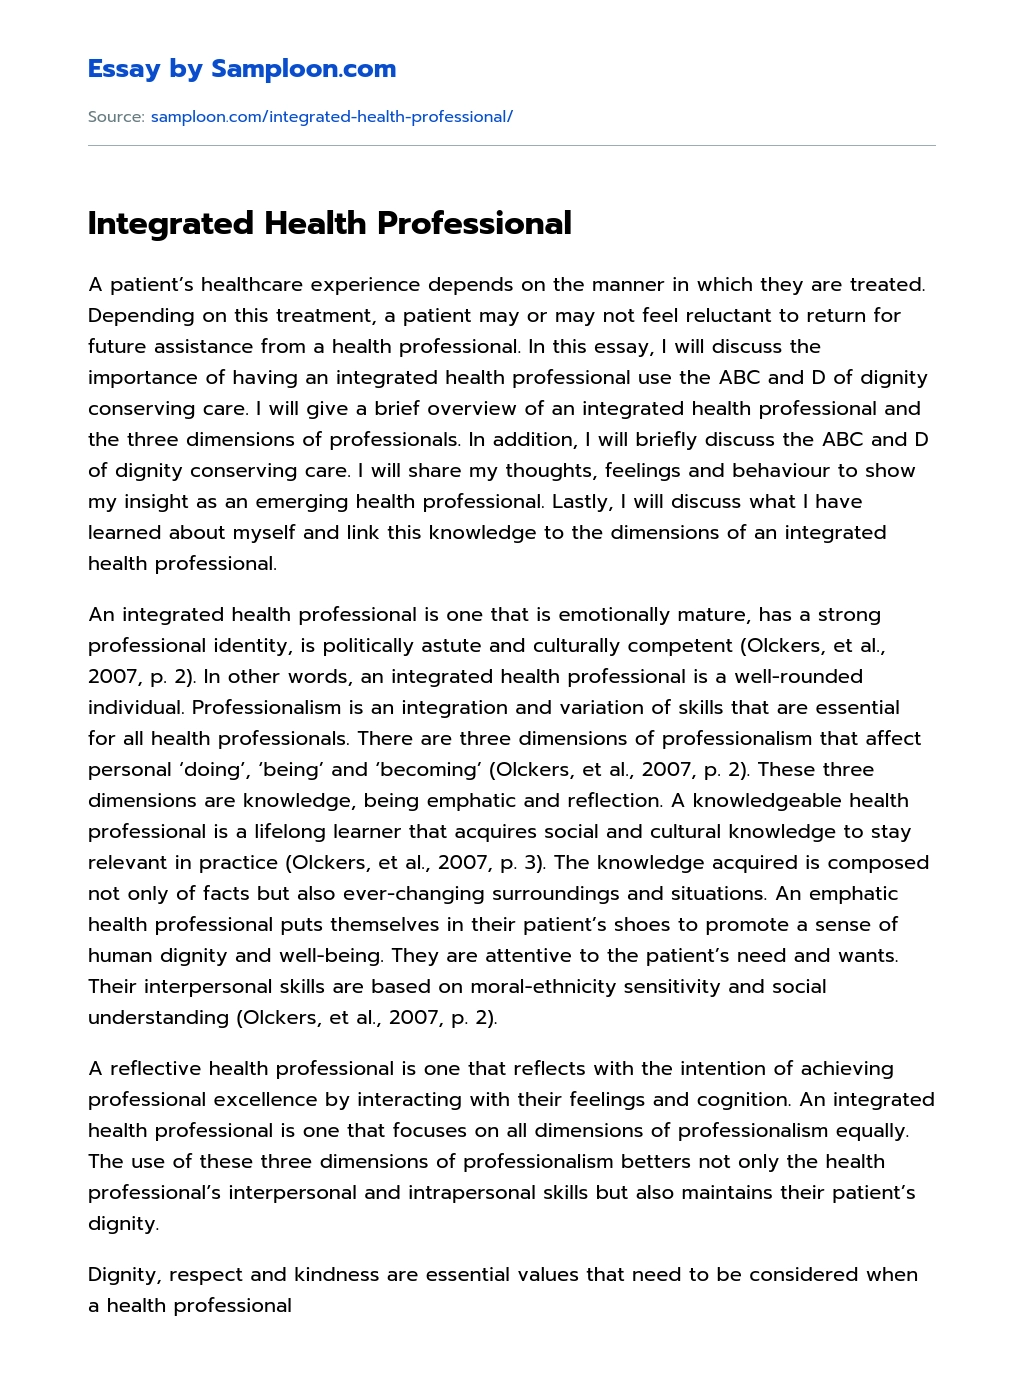 Integrated Health Professional essay